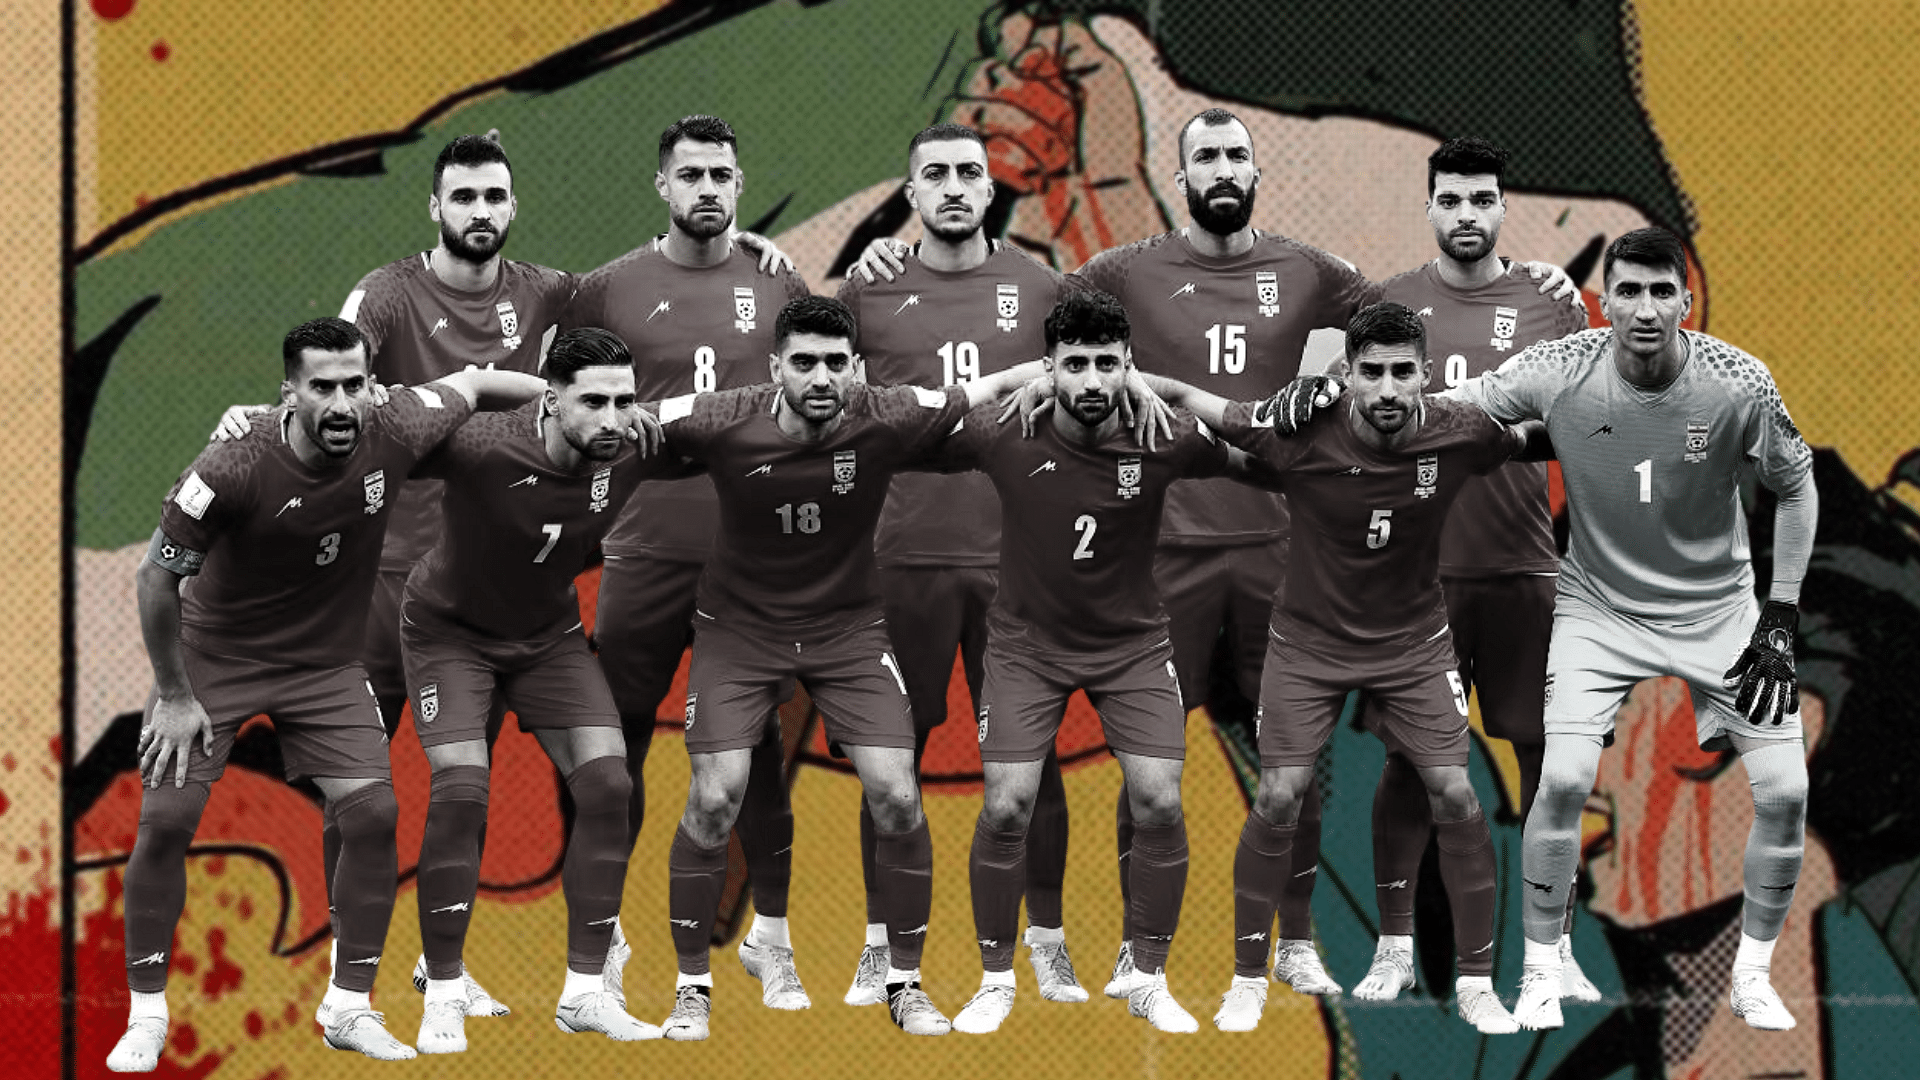 <div class="paragraphs"><p>All 11 players starting the match stood silently as the clerical regime’s national anthem played in Qatar’s Khalifa International Stadium</p></div>